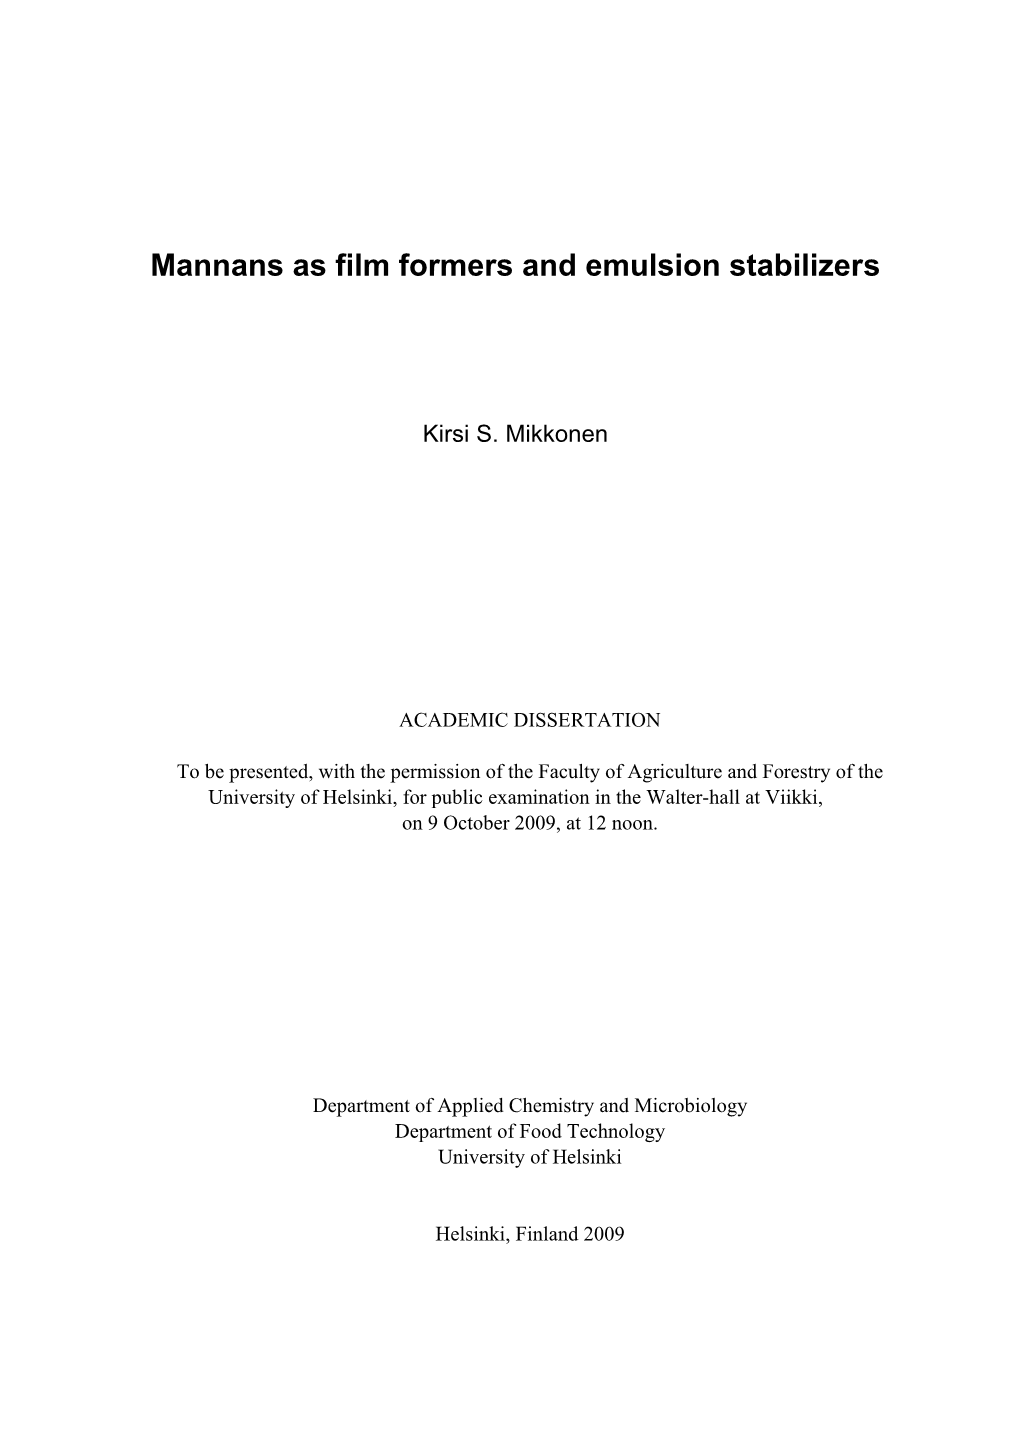 Mannans As Film Formers and Emulsion Stabilizers